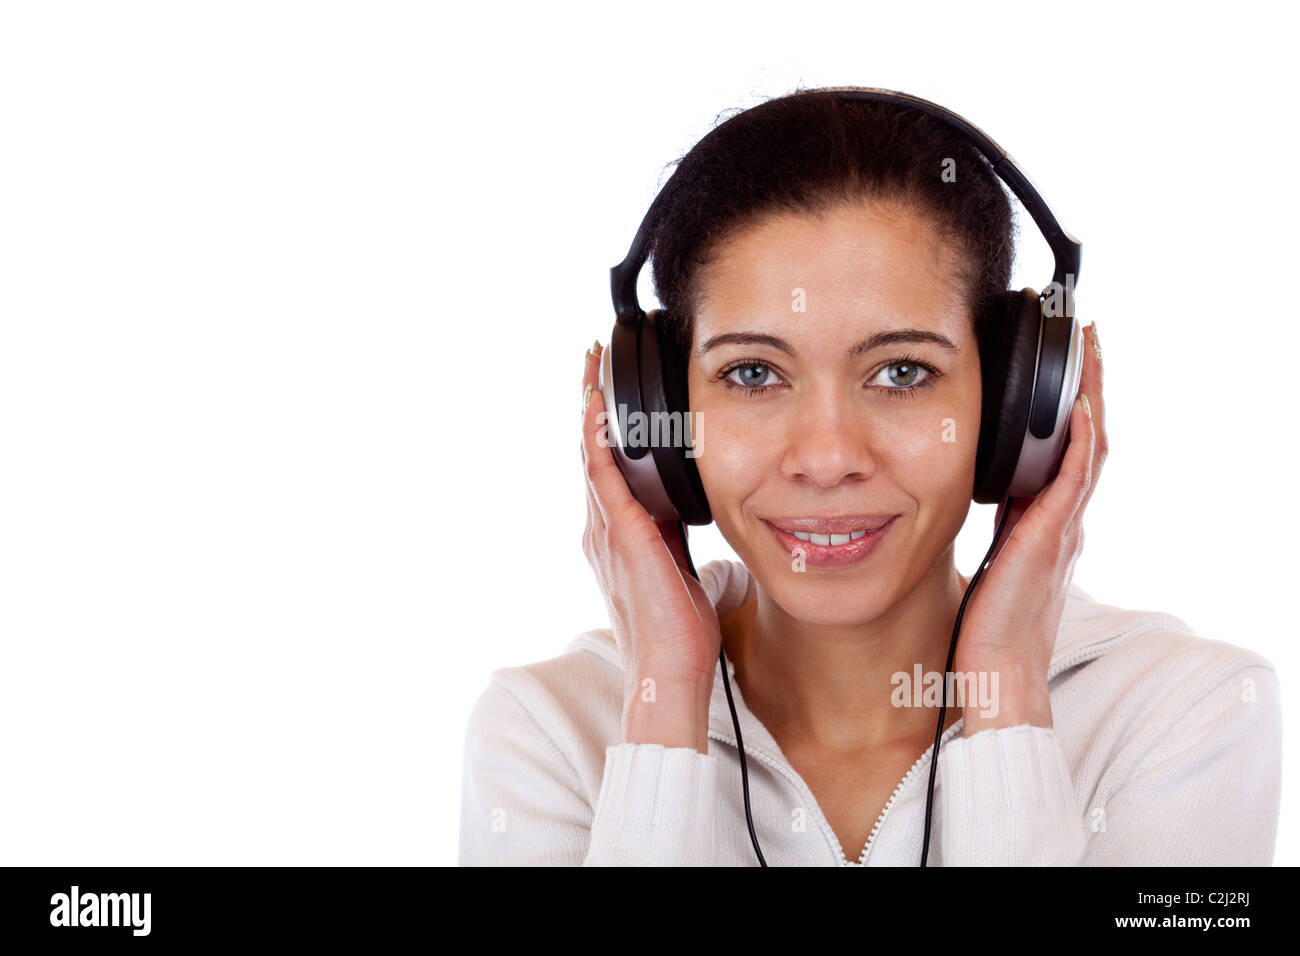 Beautiful, happy woman with headphones listens to mp3 music. Isolated on white background. Stock Photo